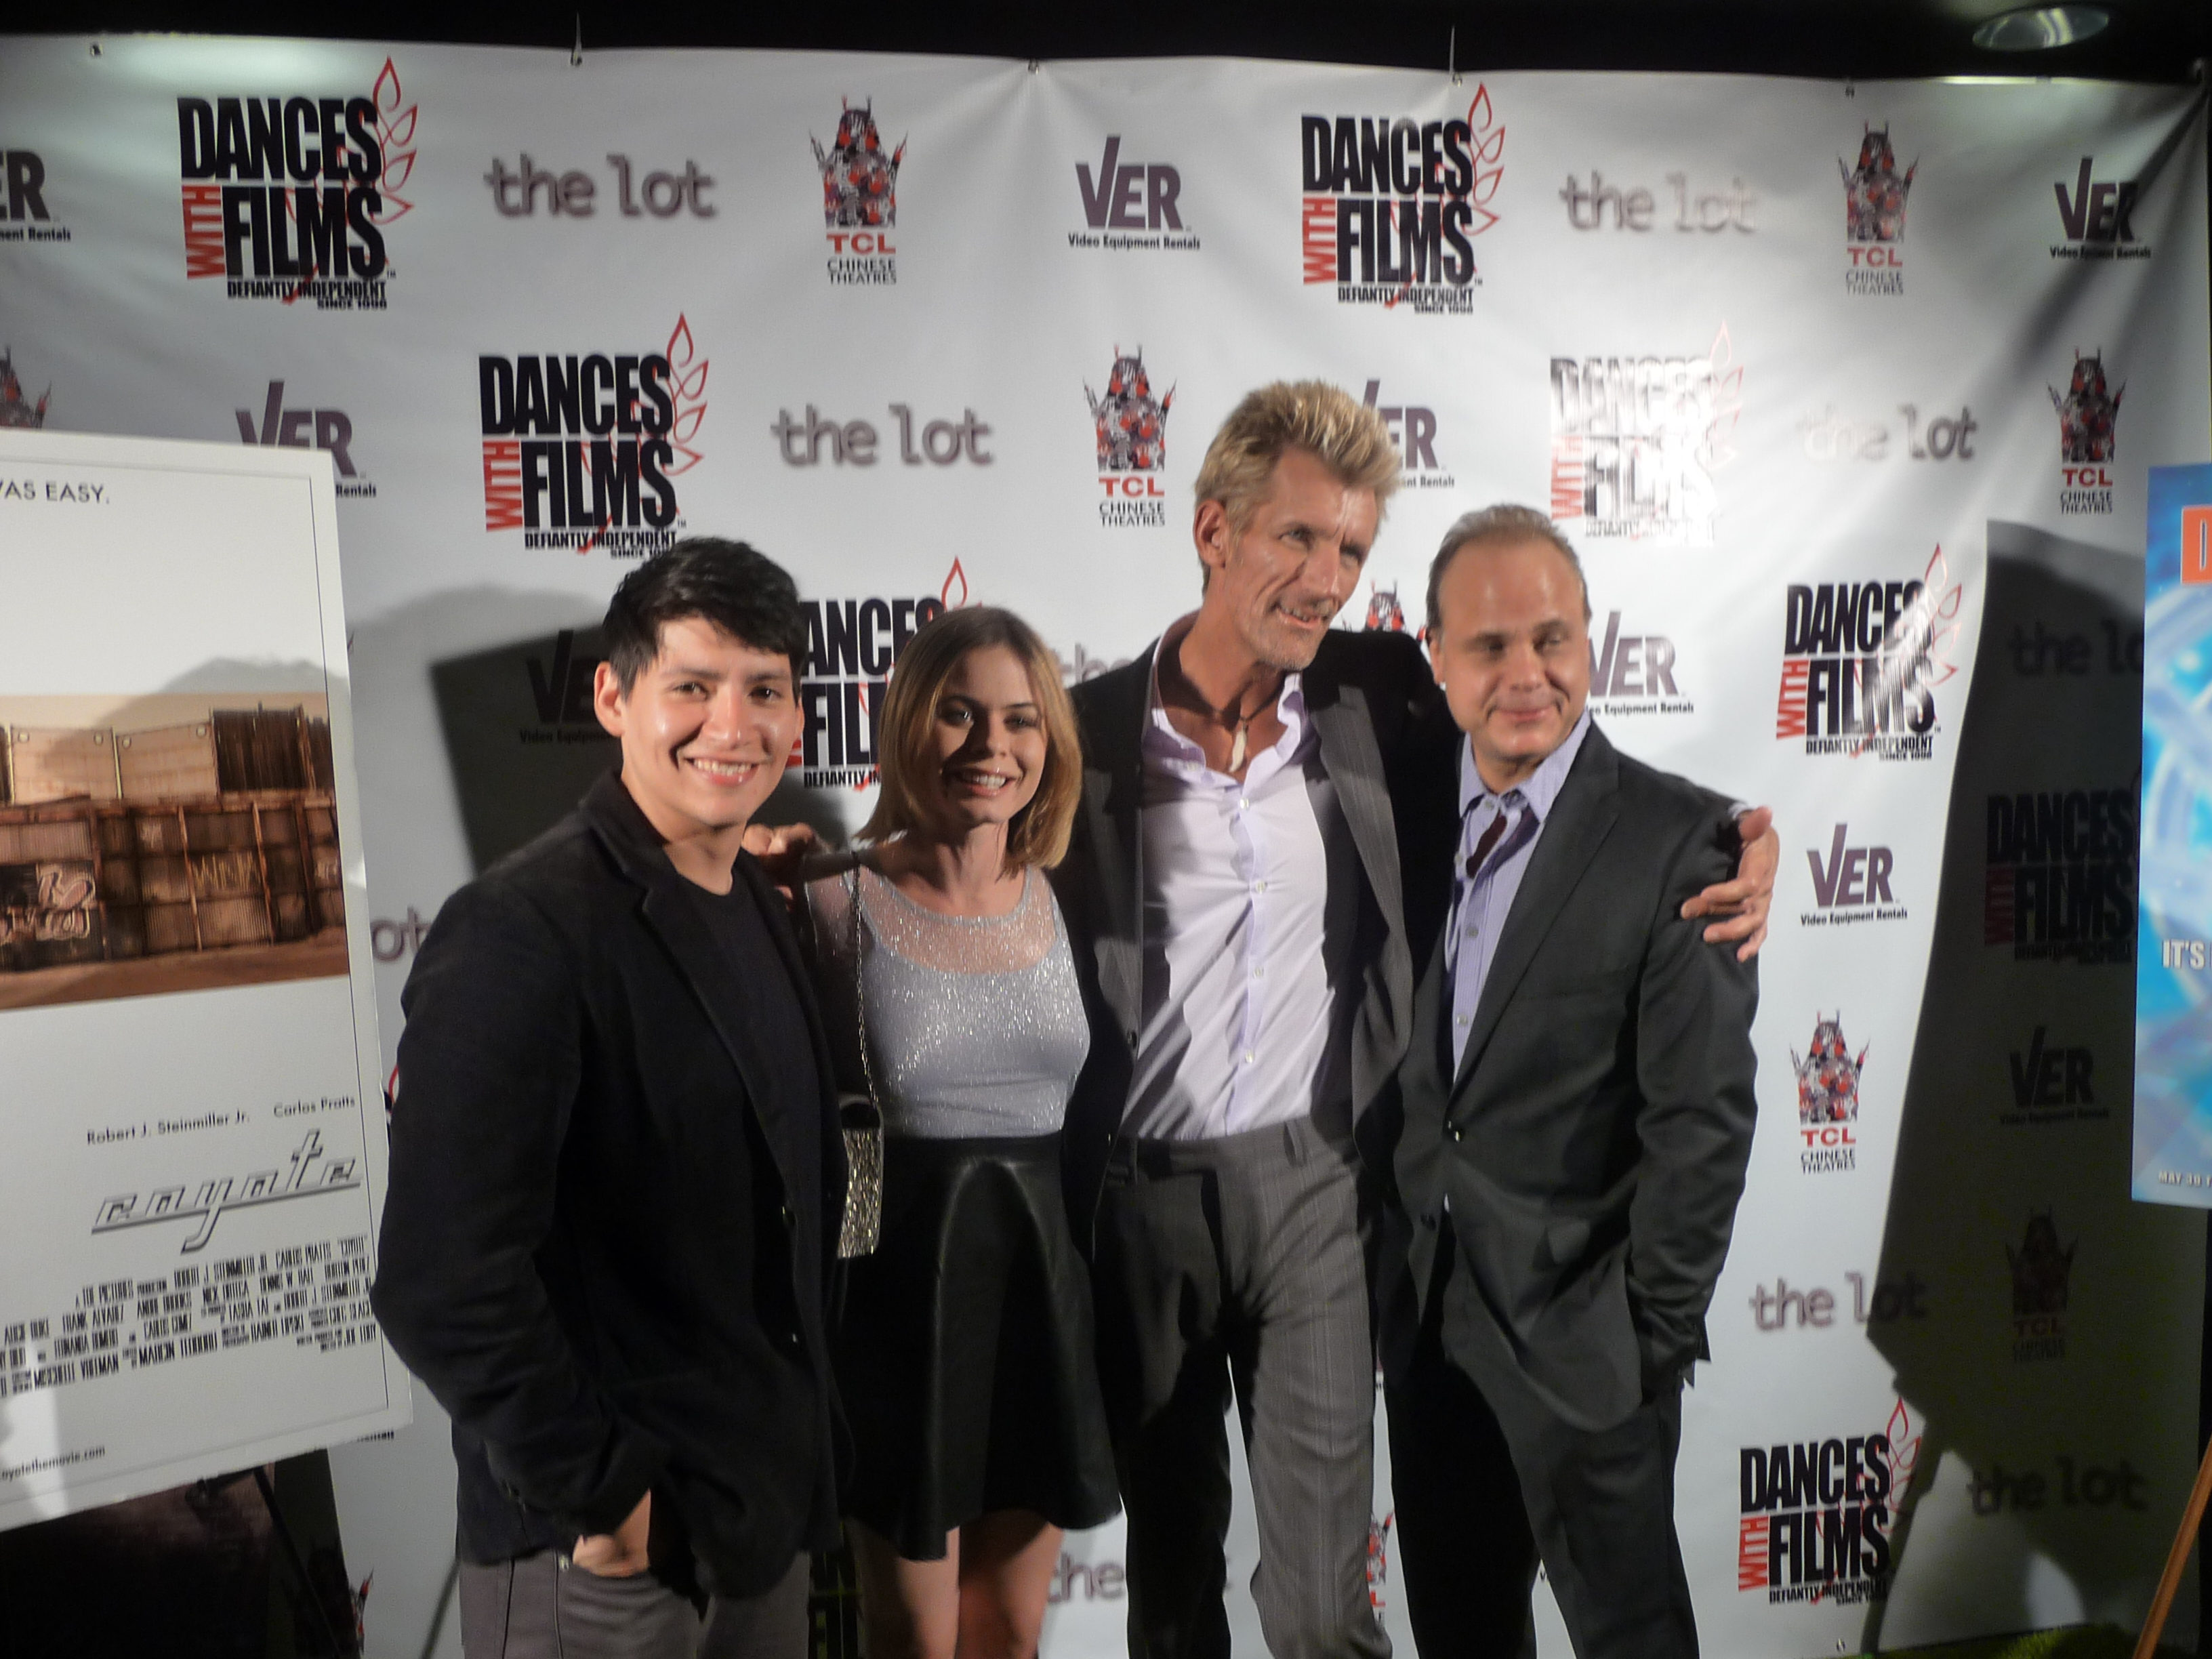 The cast of COYOTE. Carlos Pratts, Augie Duke,Neal Polister and Dennis W. Hall at the Premiere of COYOTE.